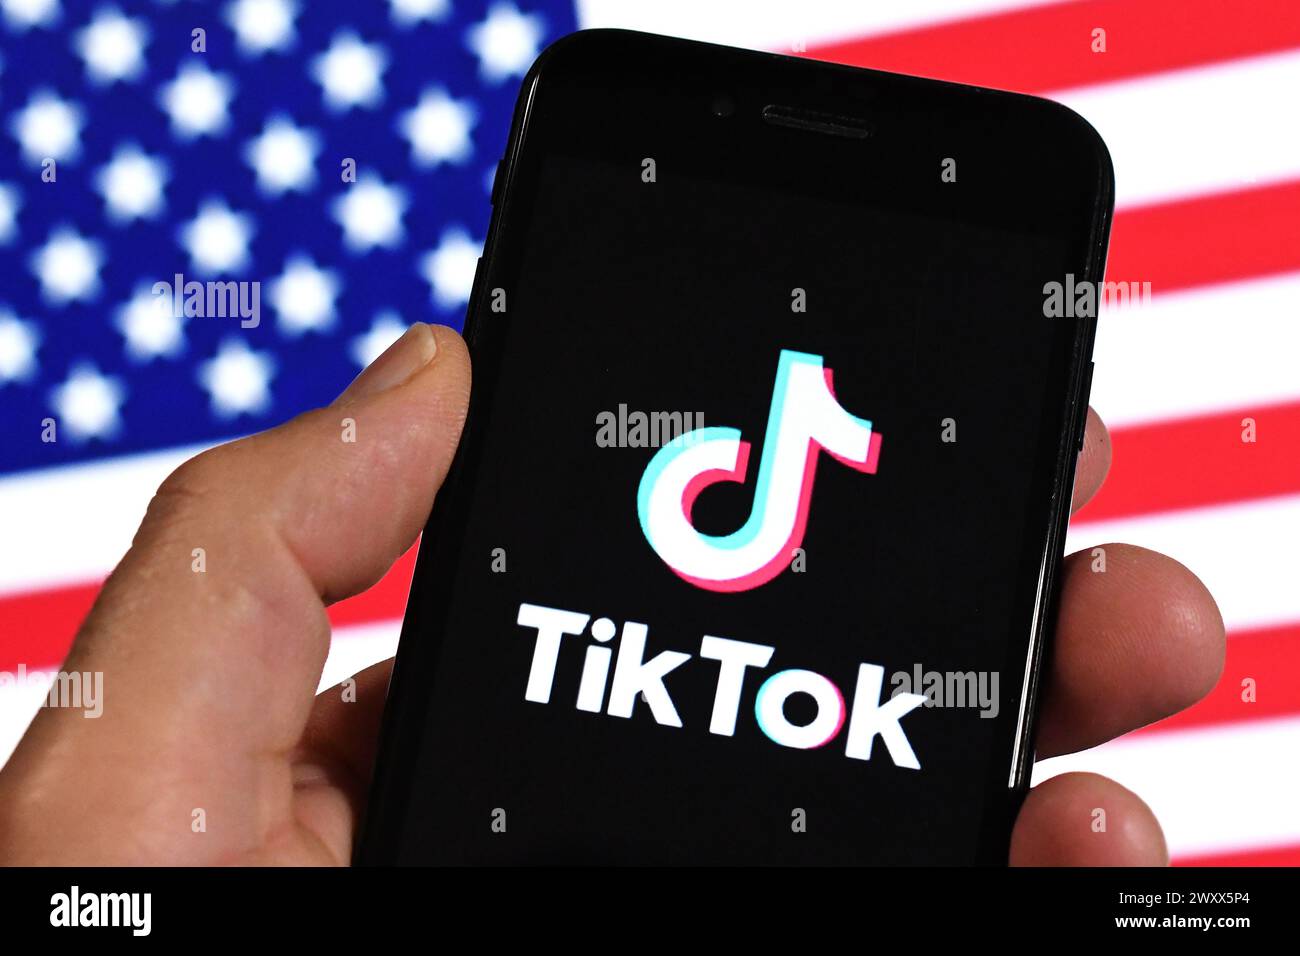 Logo of TikTok, a mobile app and social network for creating and sharing short videos by ByteDance company is seen on the screen of an smartphone. The Stock Photo